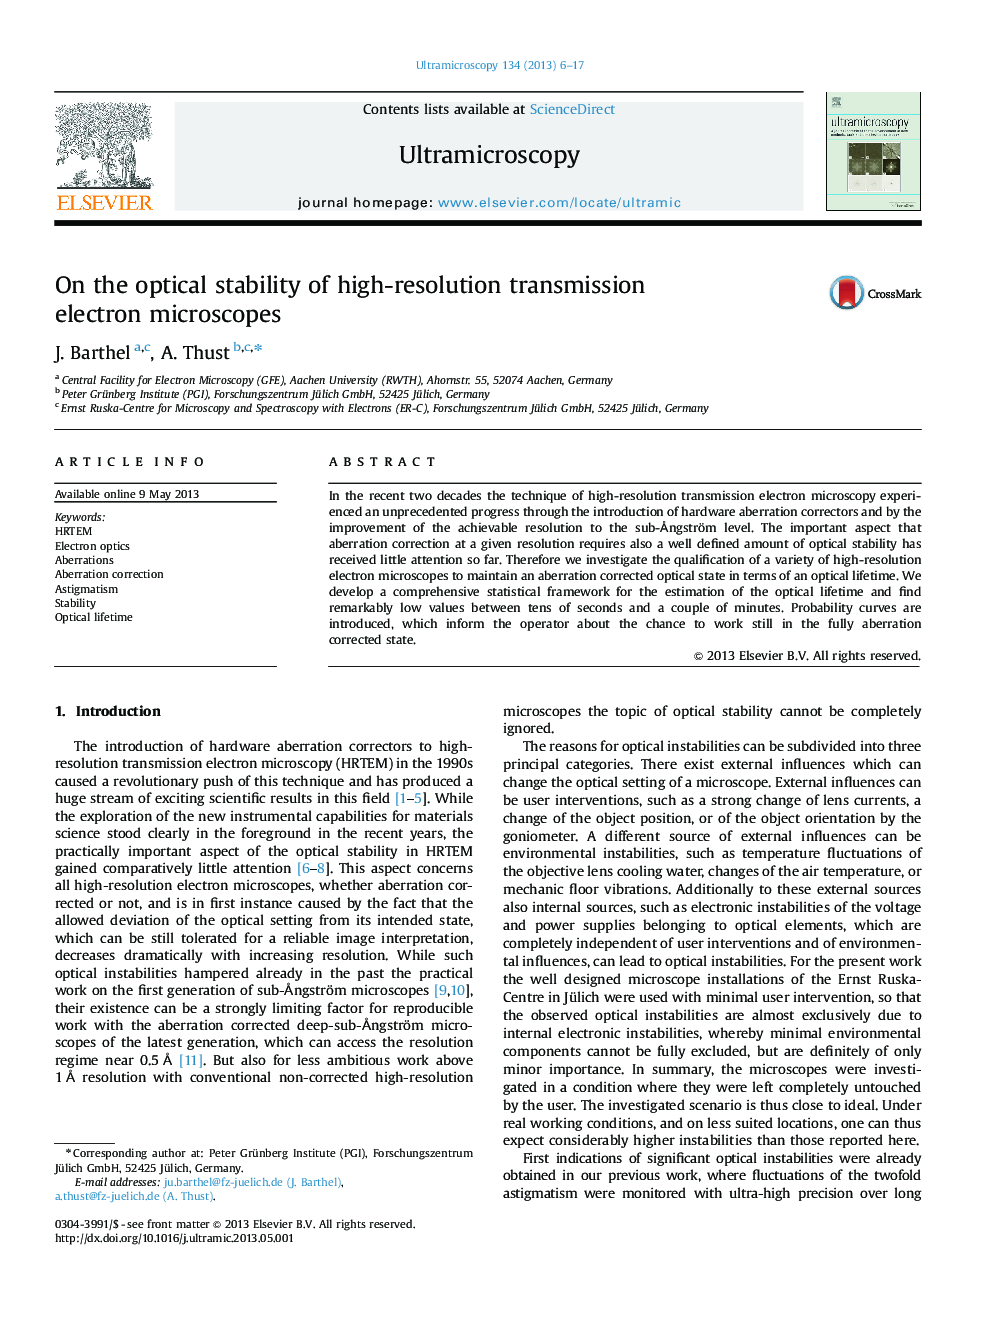 On the optical stability of high-resolution transmission electron microscopes